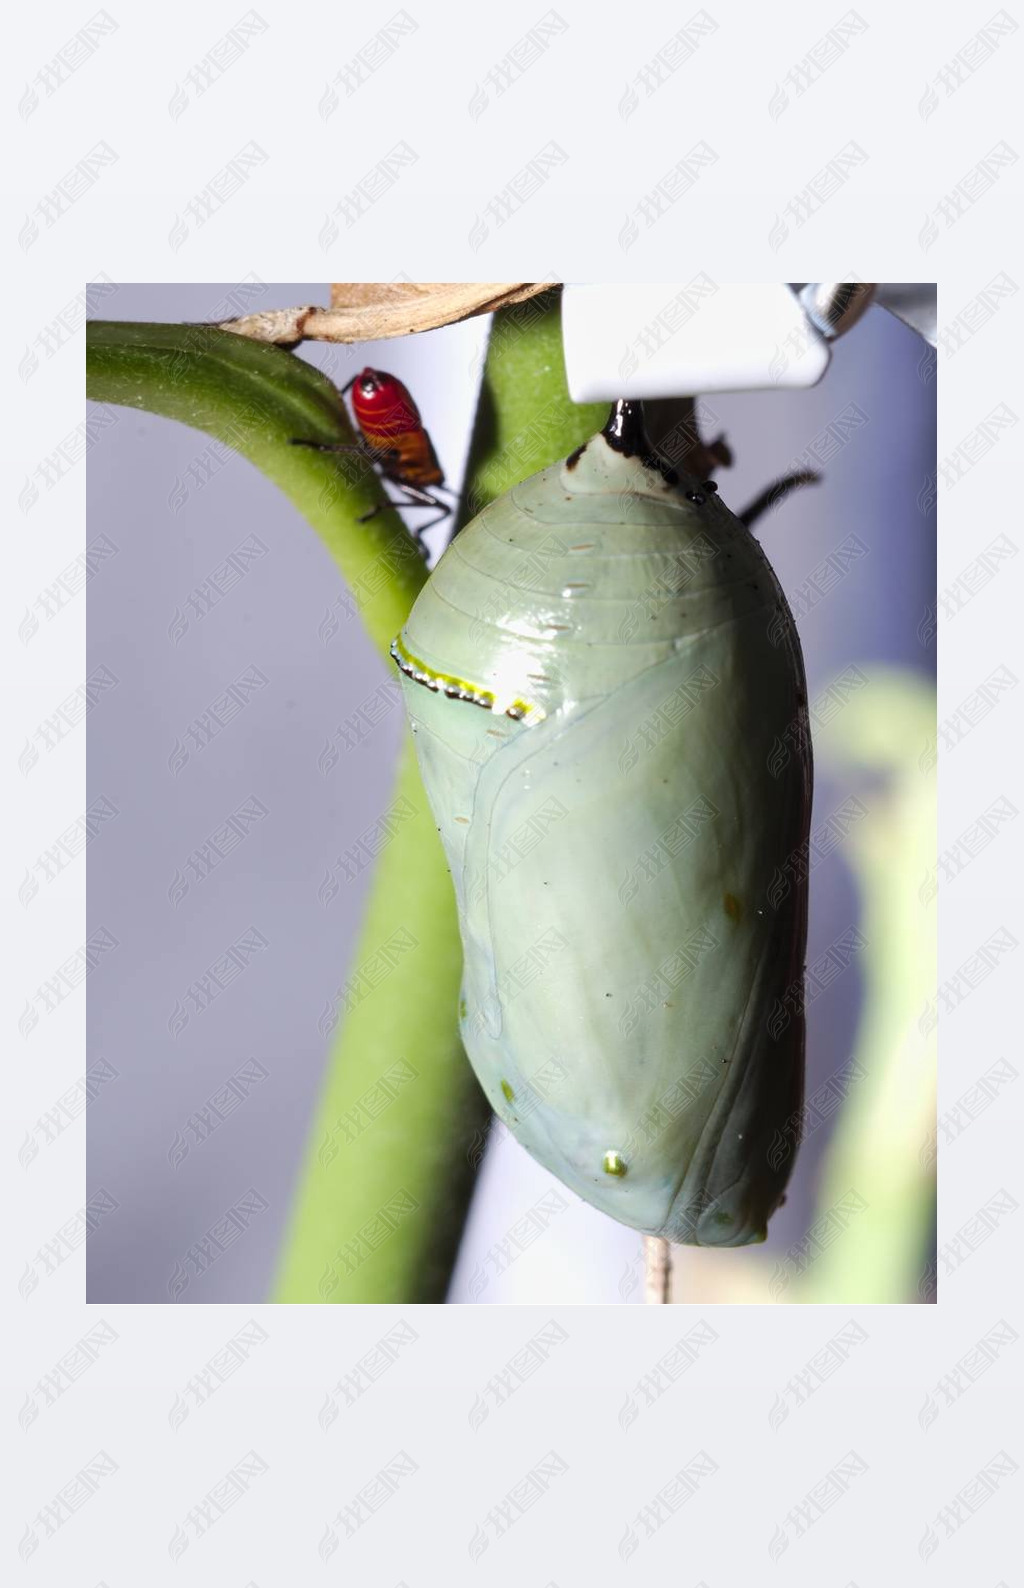 A vertical selective focus shot of a cocoon and an insect on the branch of a plant